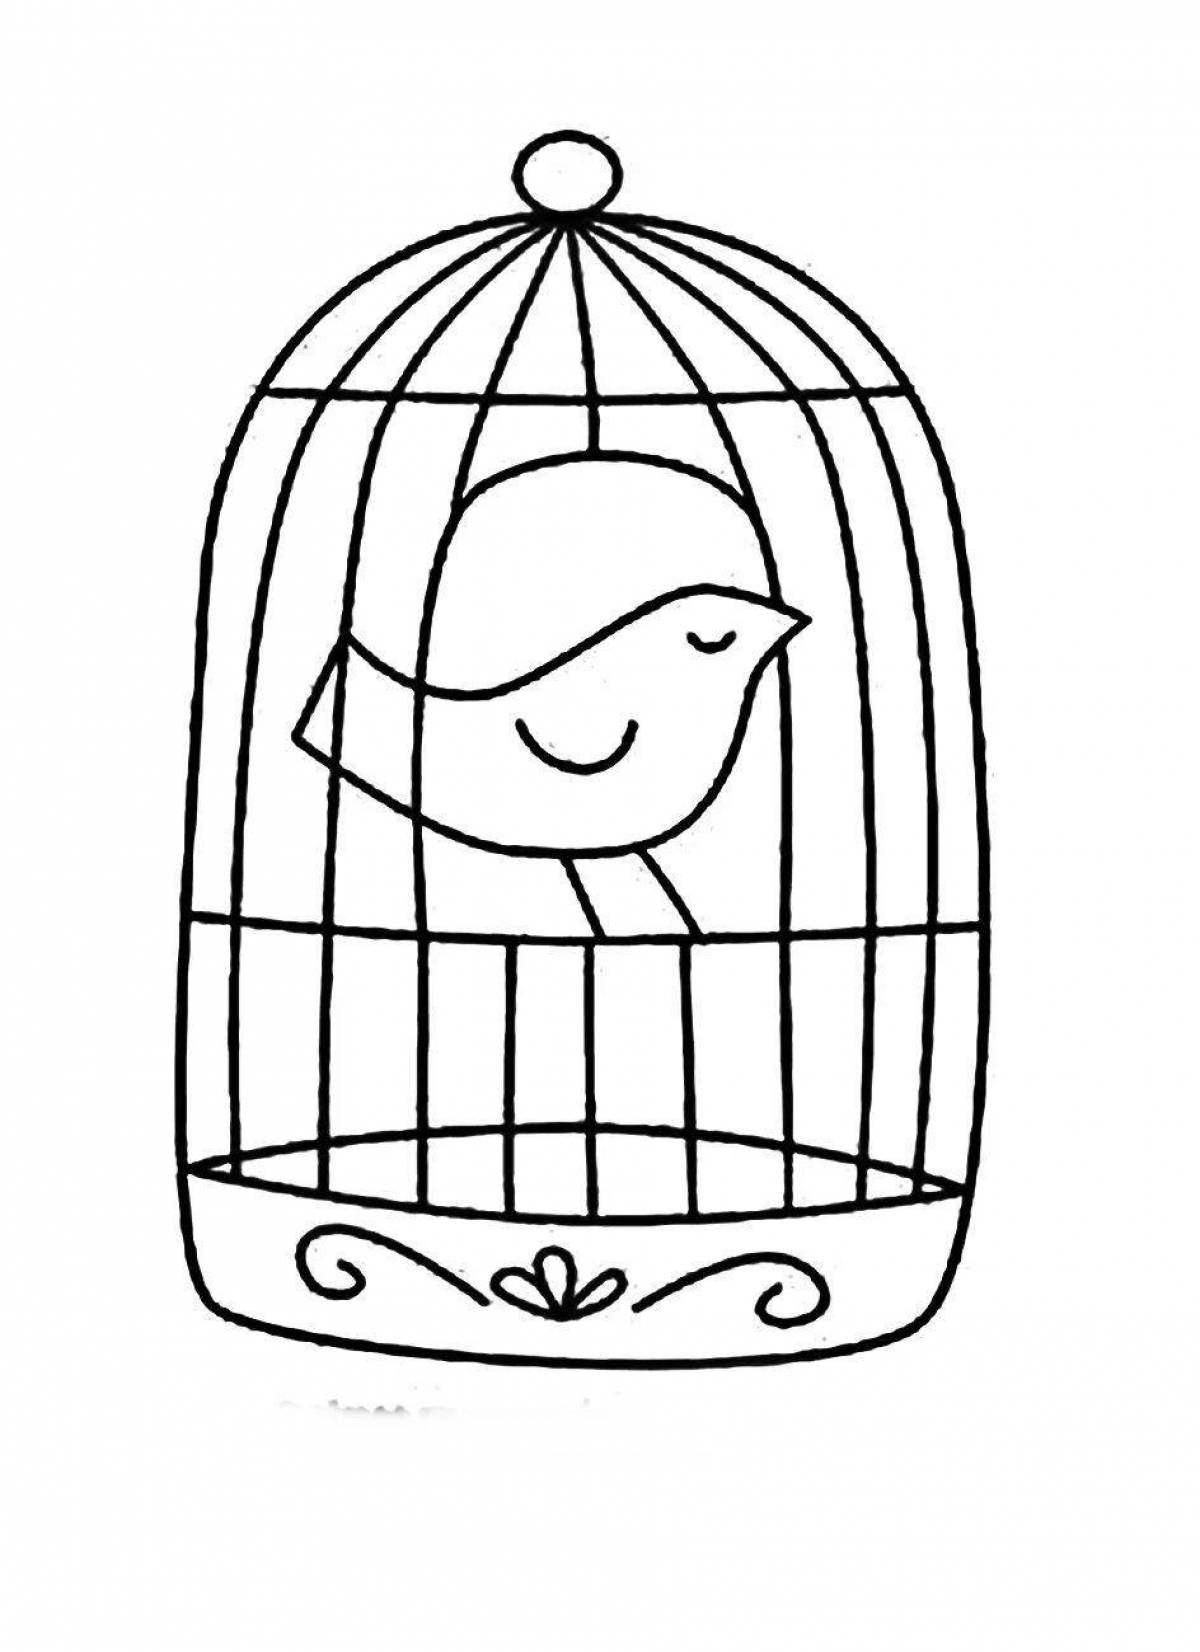 Color-frenzy cage coloring book for kids